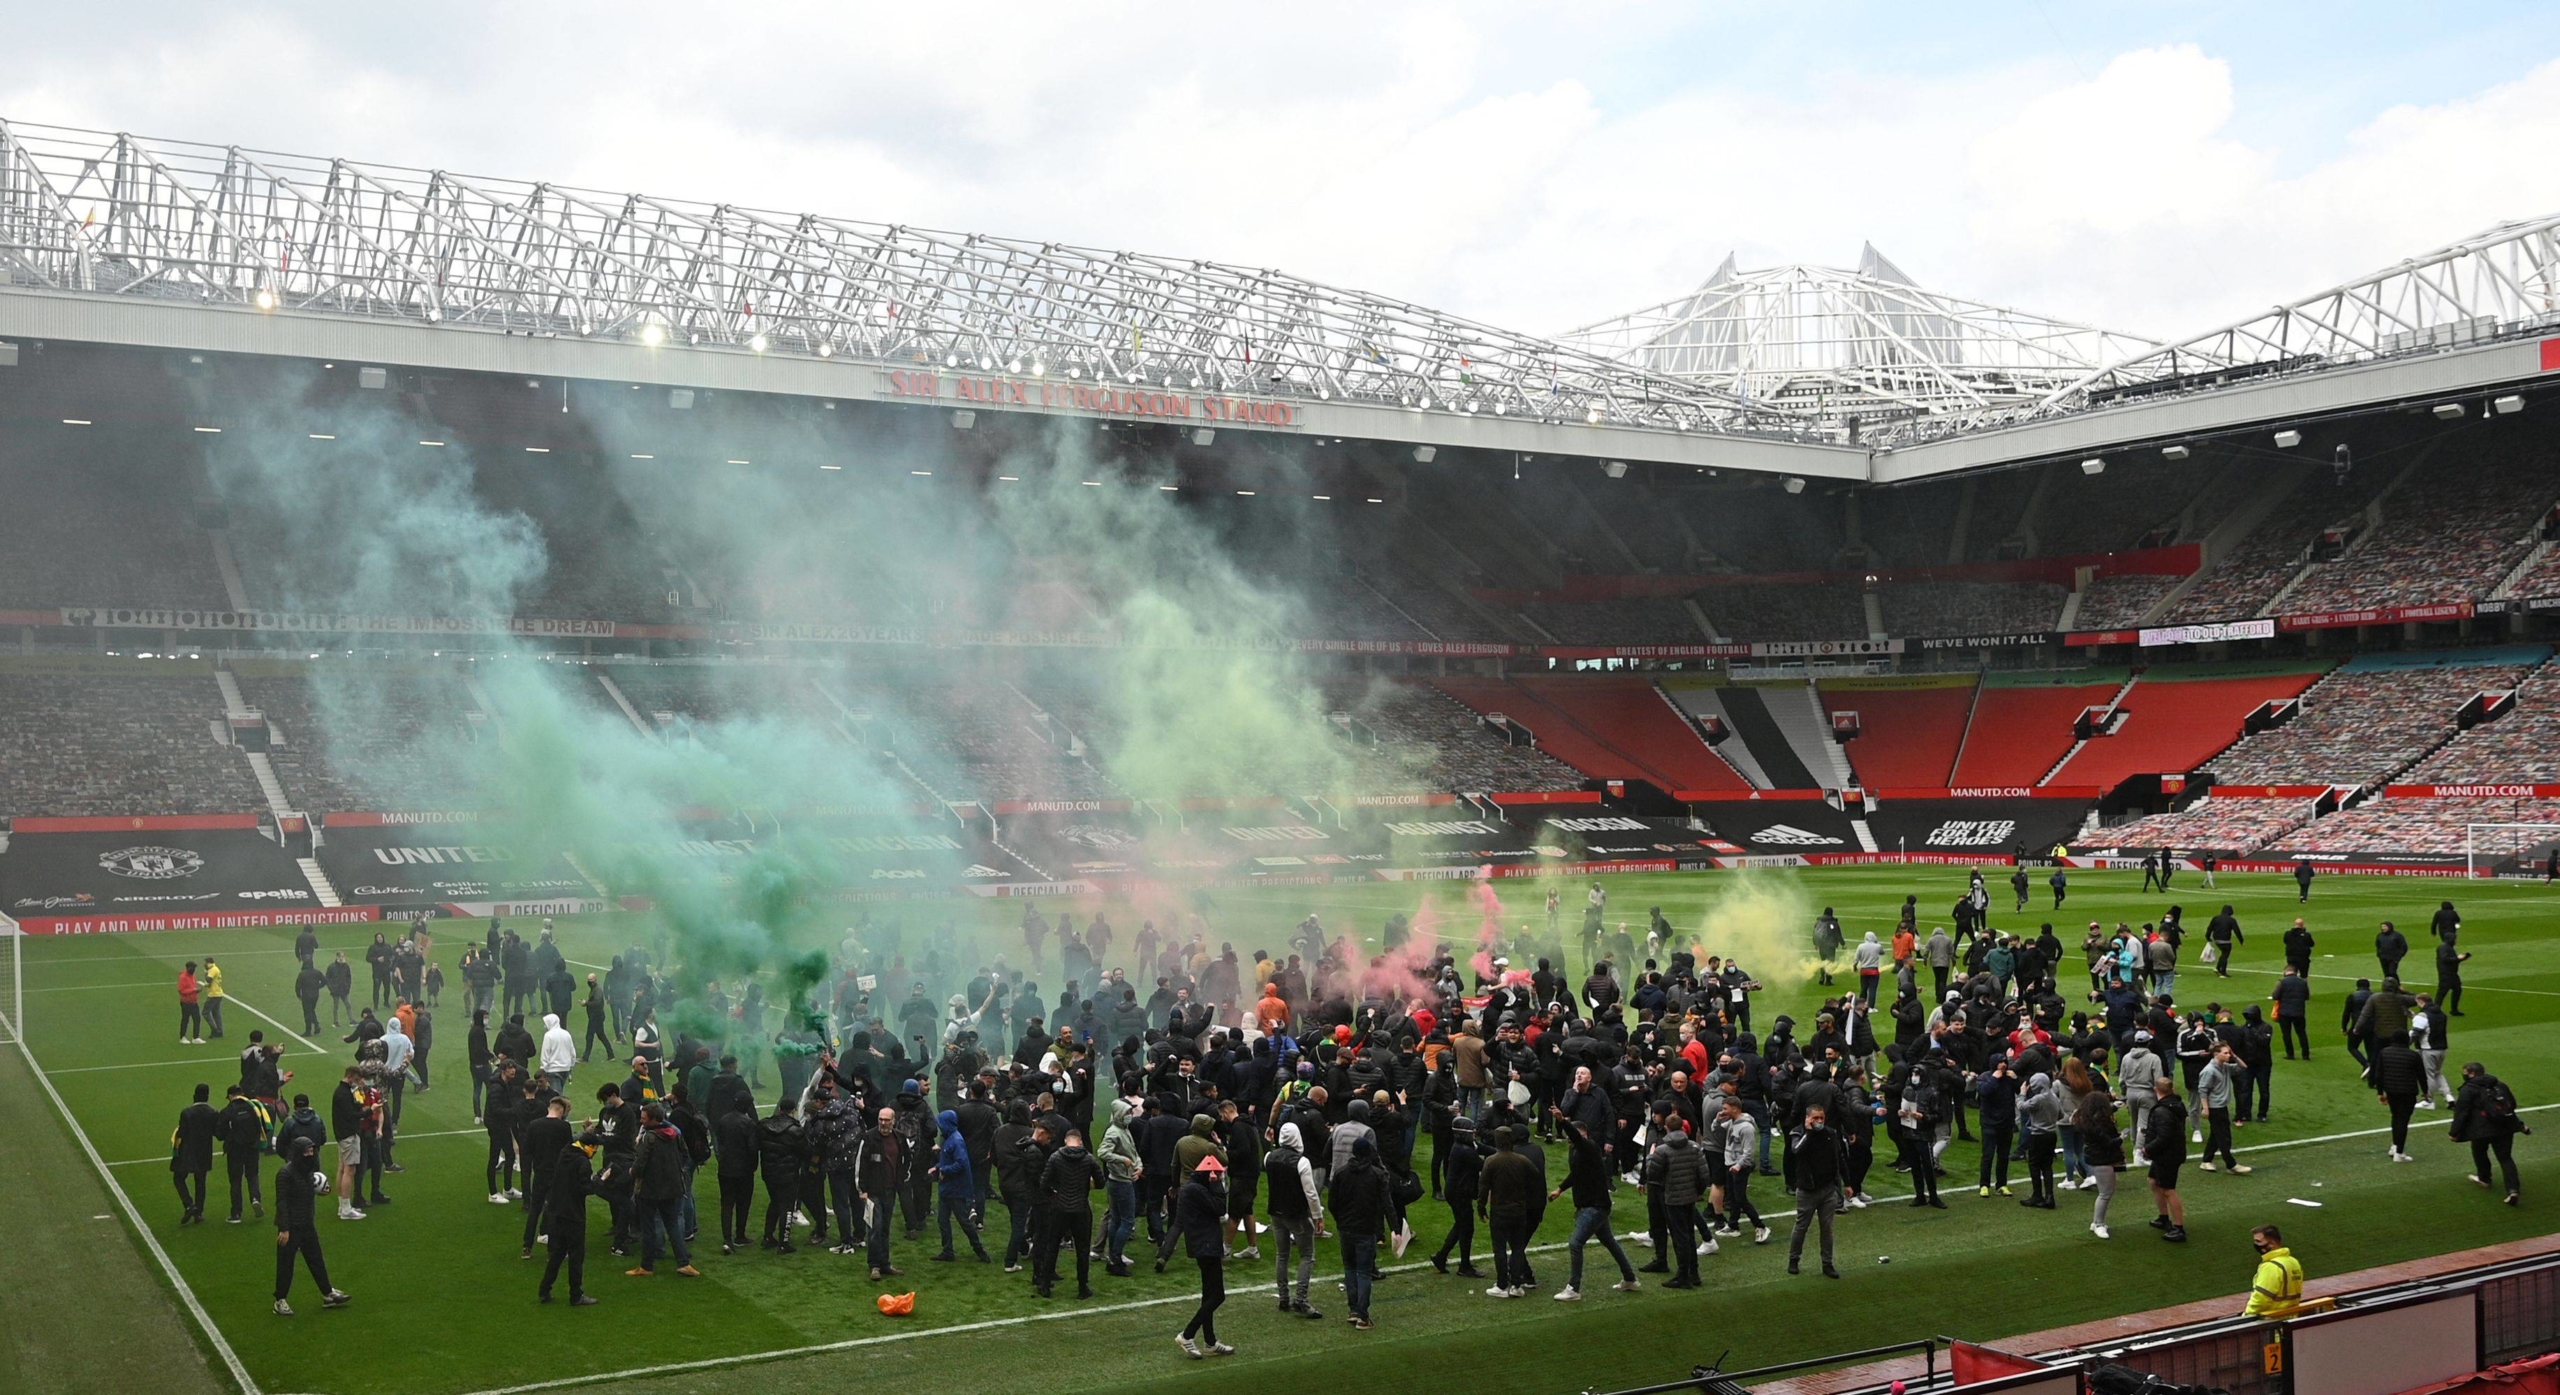 At Old Trafford, there have frequently been demonstrations against the Glazer family's ownership of the team.